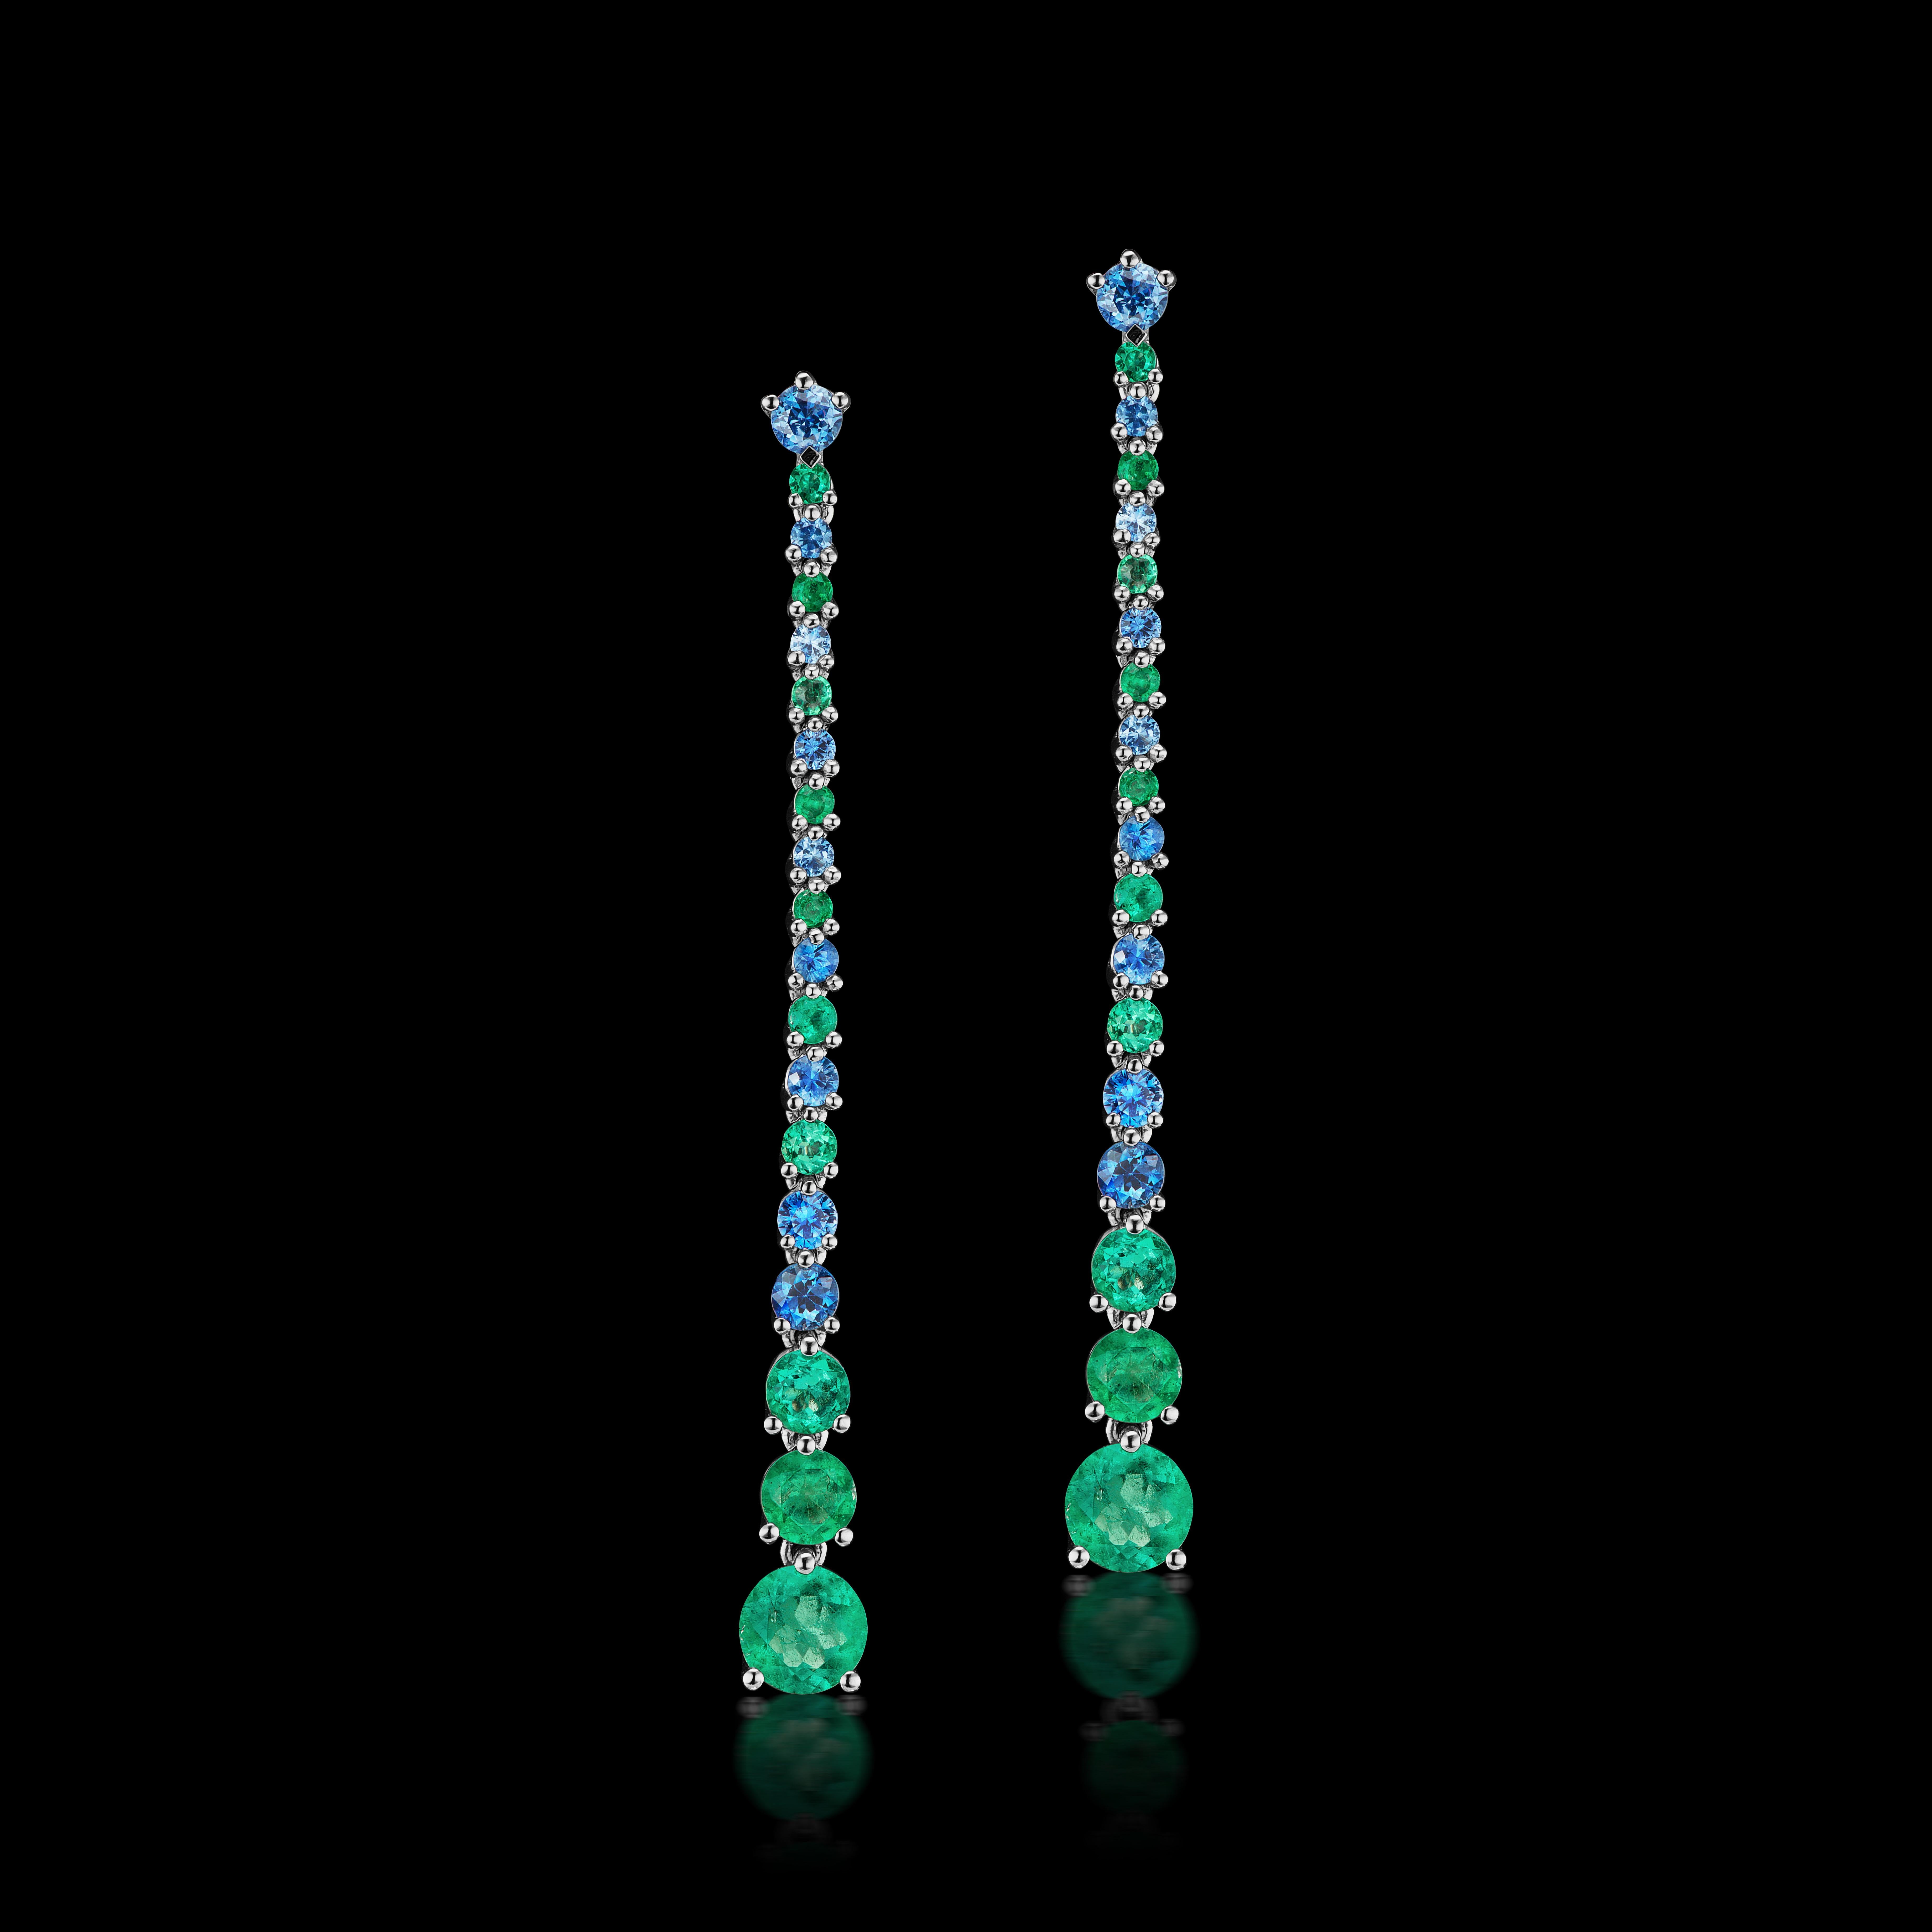 Alternating and graduating emeralds and sapphire drop earrings from our Vapour Collection with 5 grams of Platinum and  2.15 carats of genuine emeralds and sapphires. The gemstones are graduated and are 2 inches in length. 

